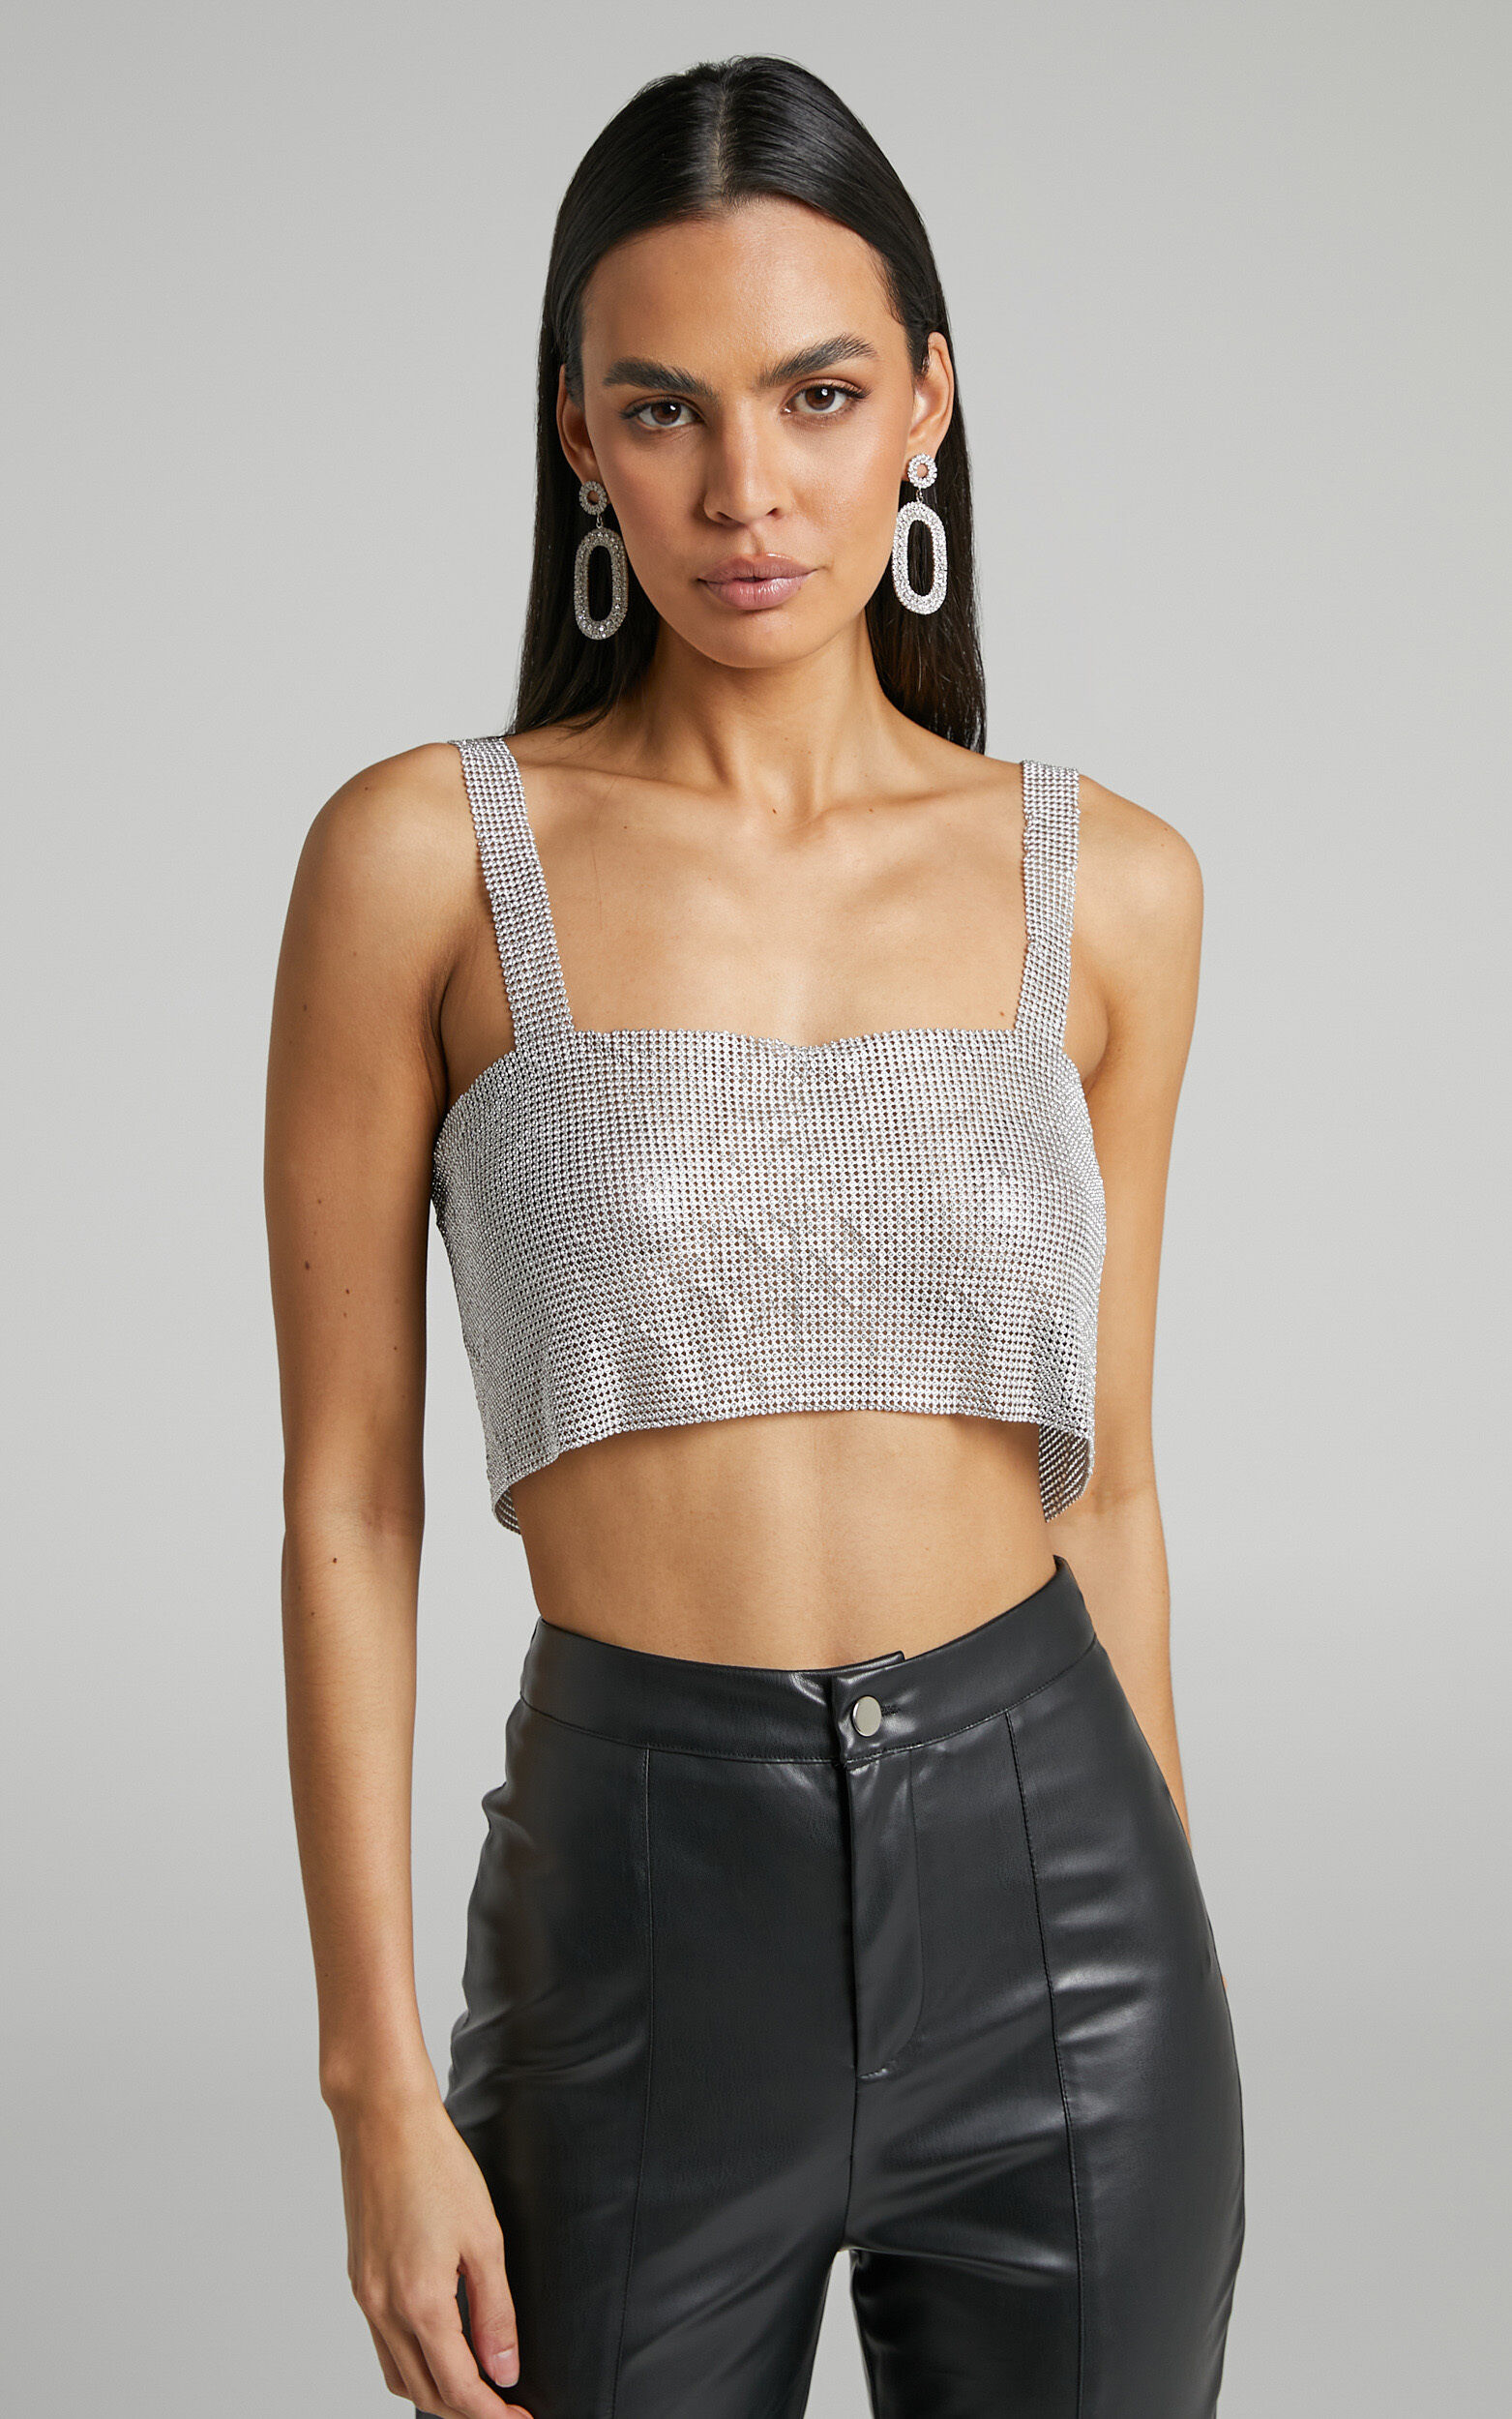 Starry Nights Top - Mesh Cropped Top in Silver